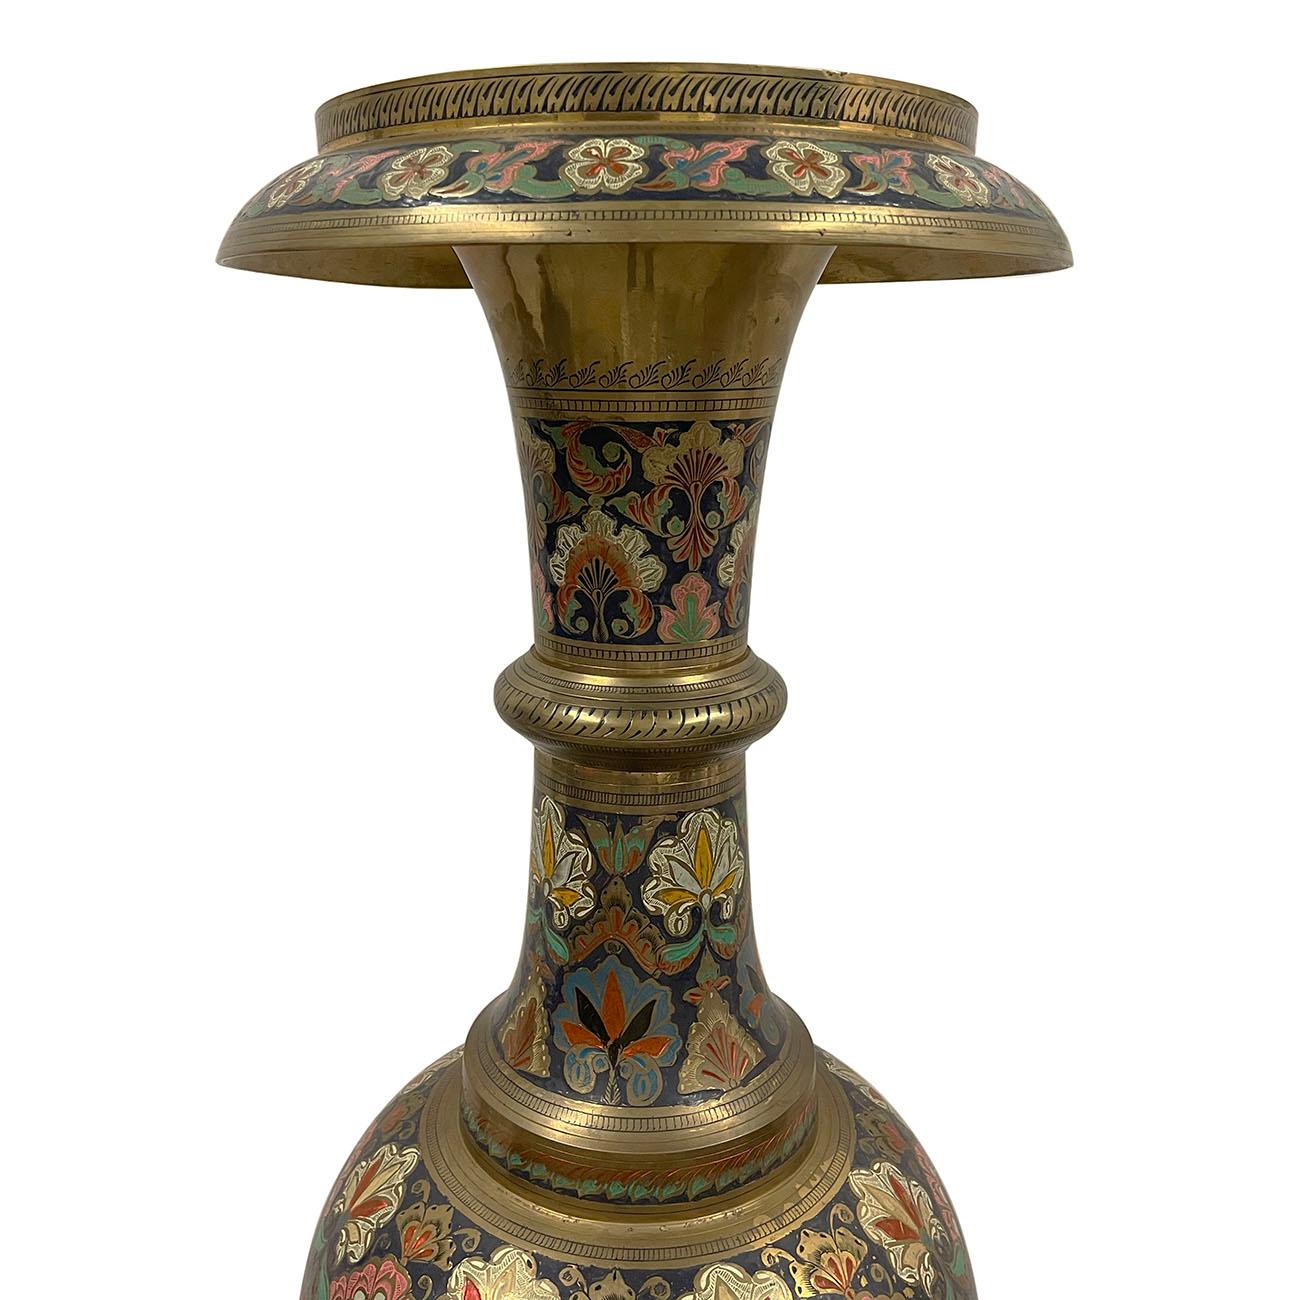 Very Large bronze polychrome enameled floor vases in Arabic style, made from bronze with rich color ornamental geometric and floral patterns. Very heavy, full of patina. From the pictures, you can see a lot of detail bronze carving works with rich